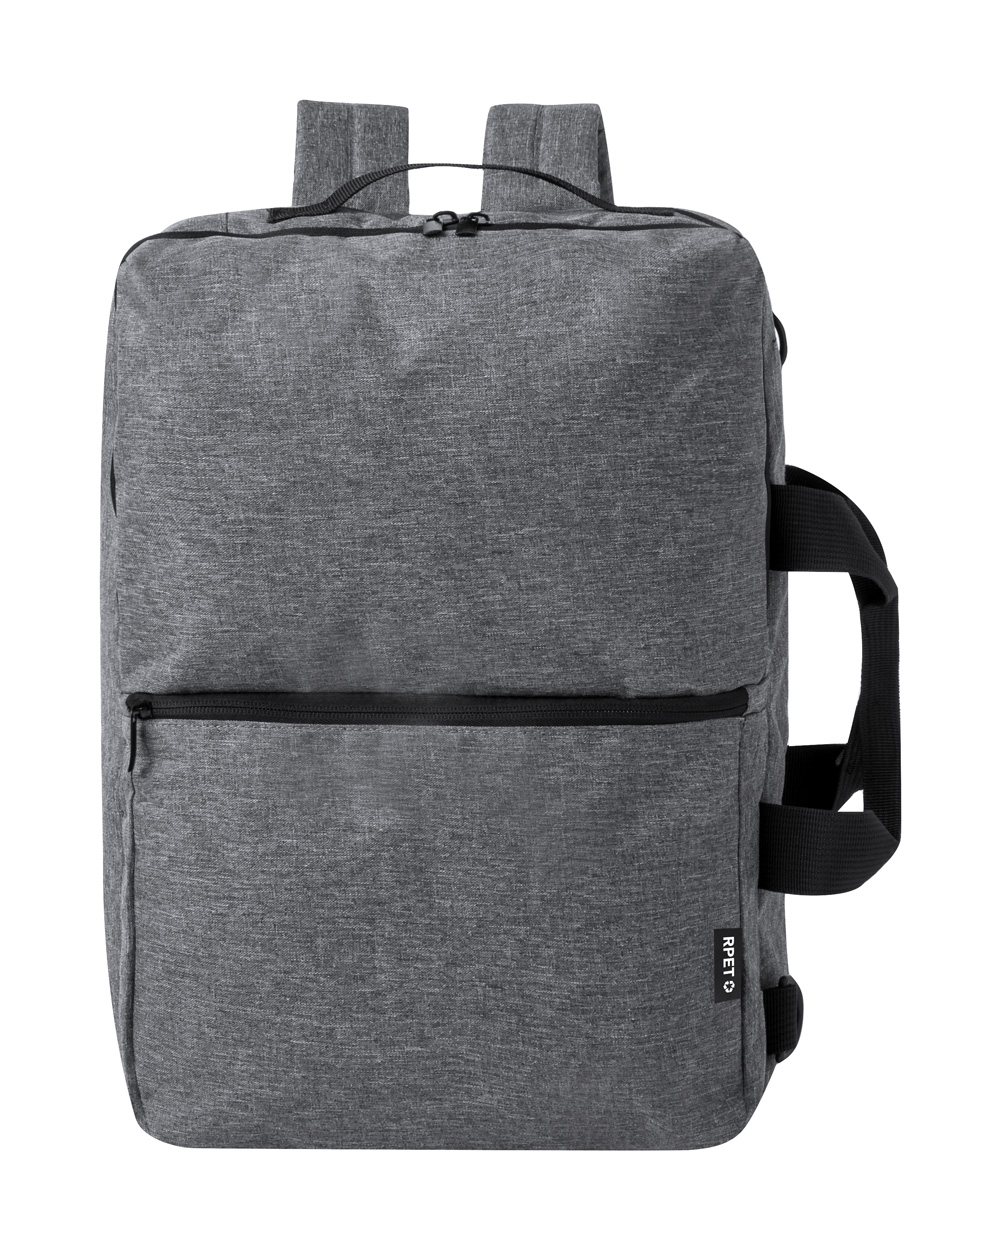 Makarzur RPET backpack for documents - Grau